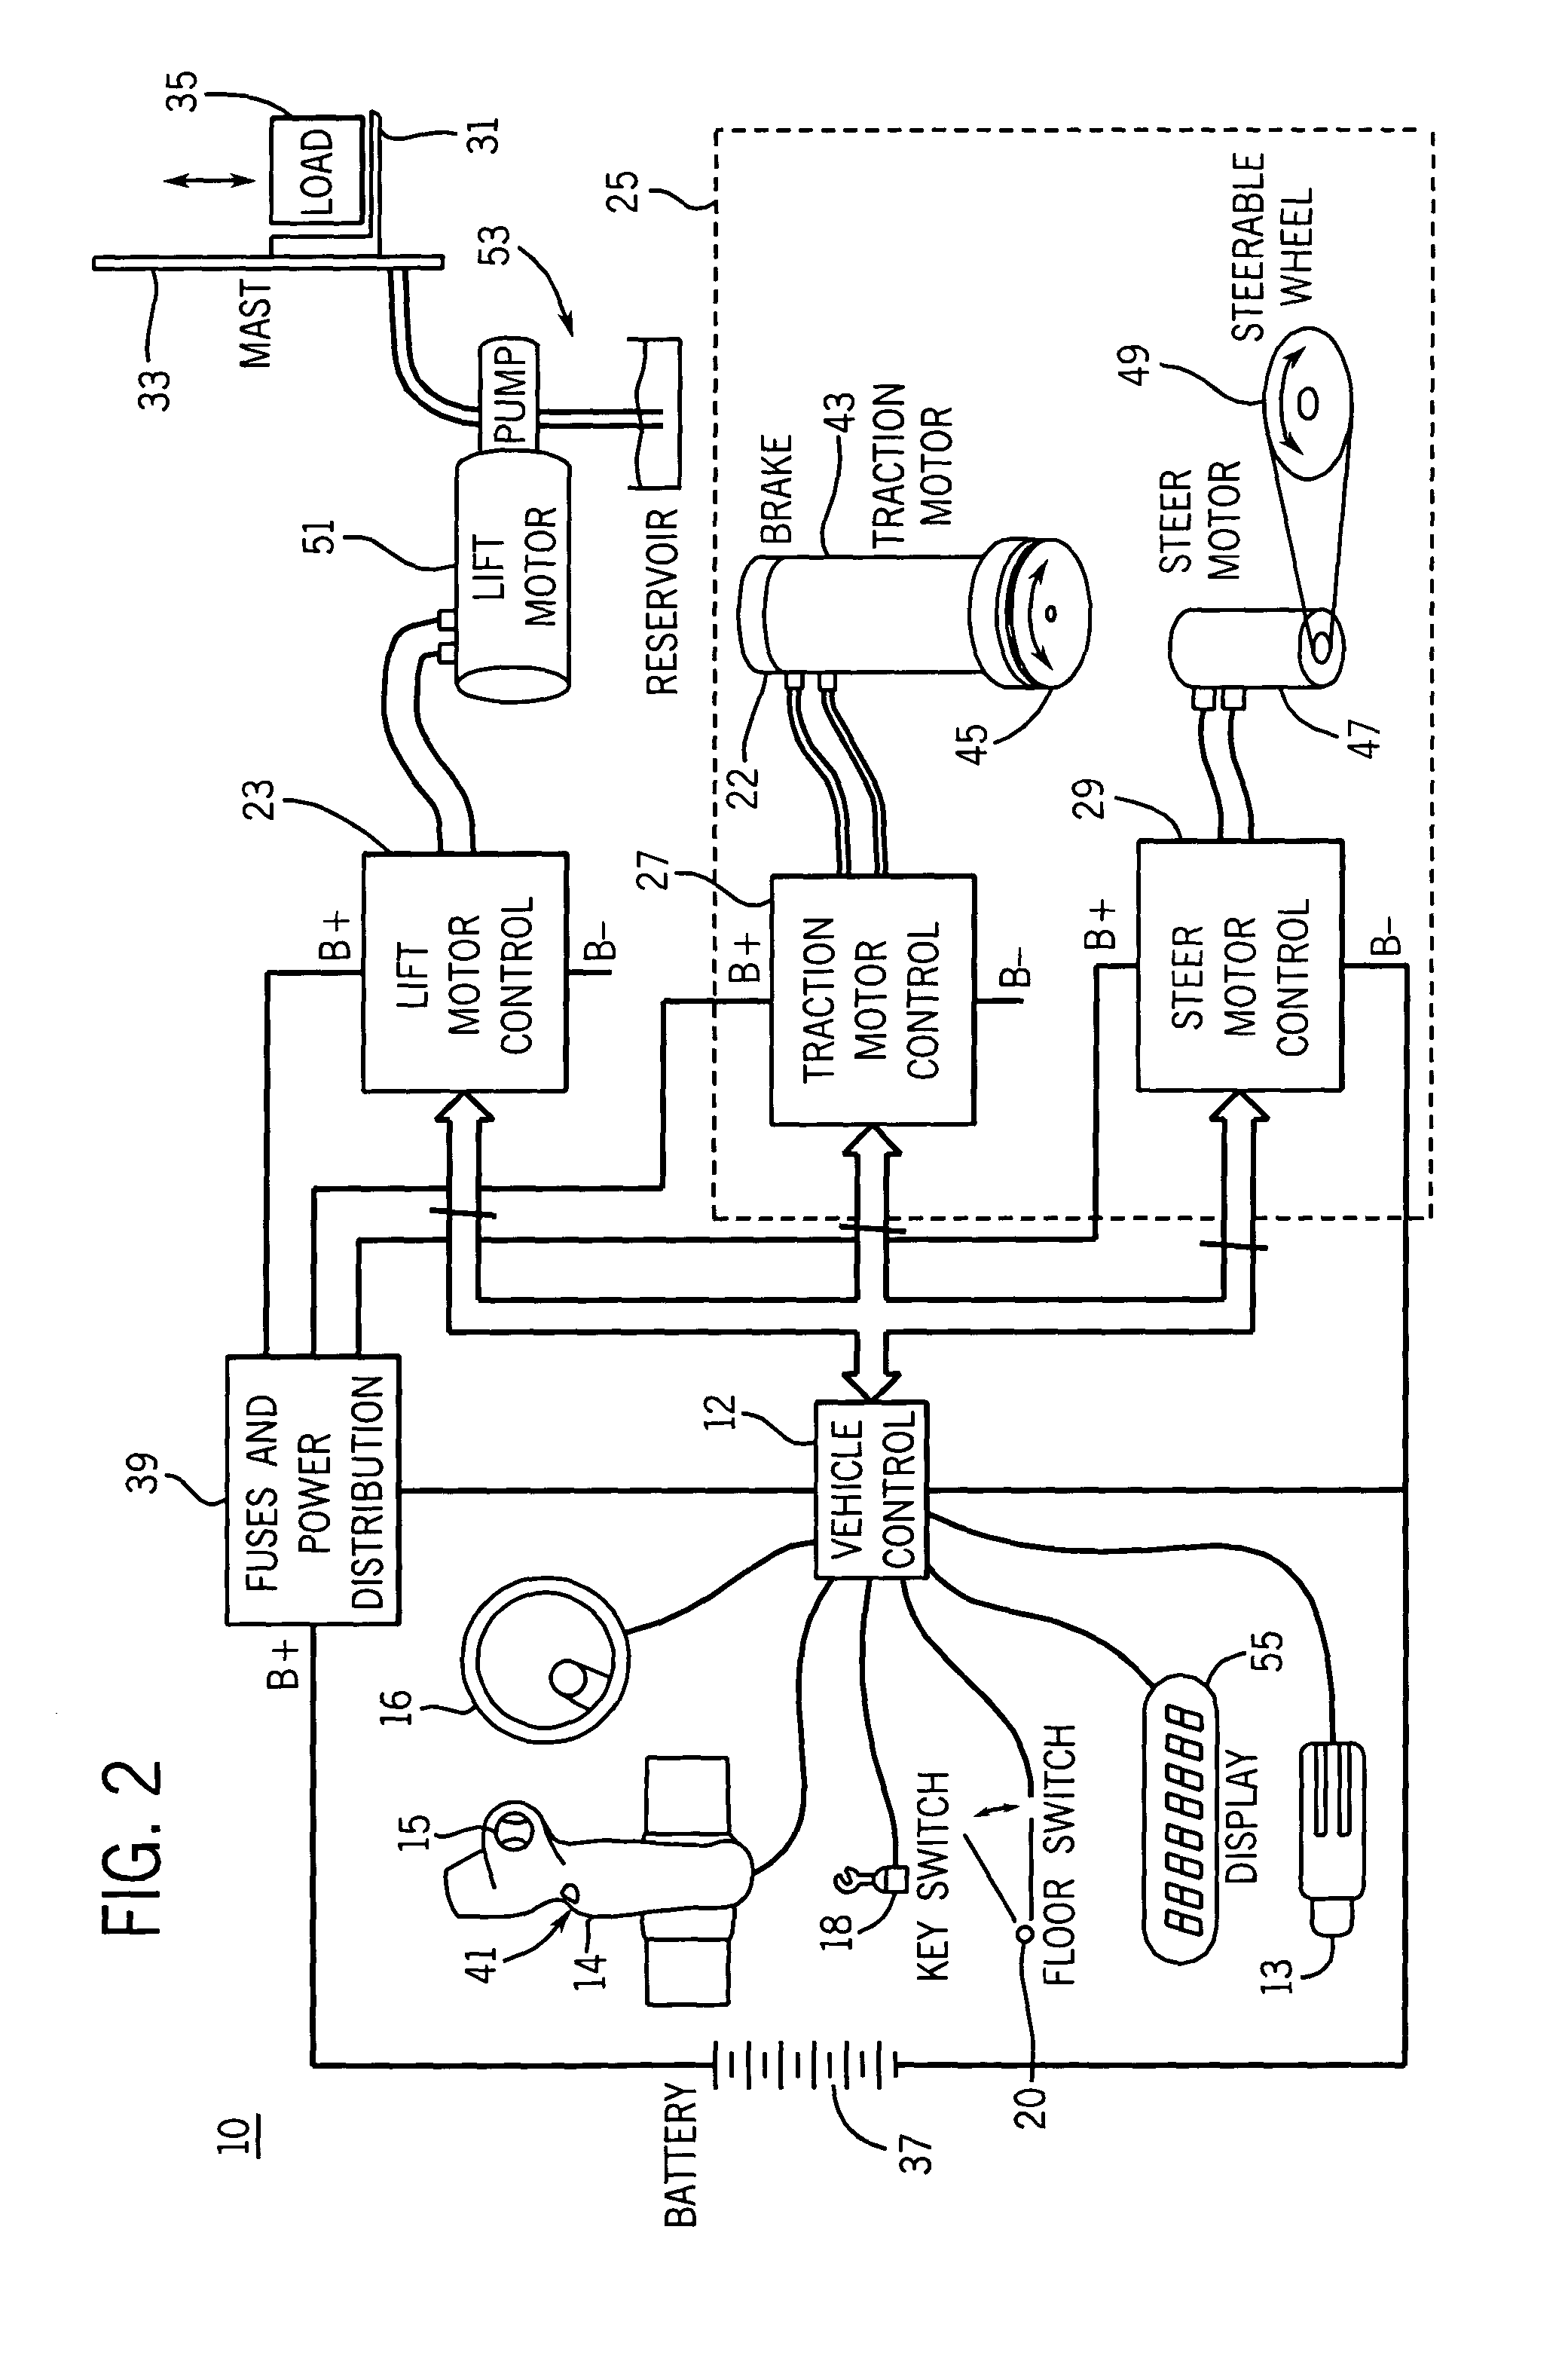 Control system for material handling vehicle with dual control handles